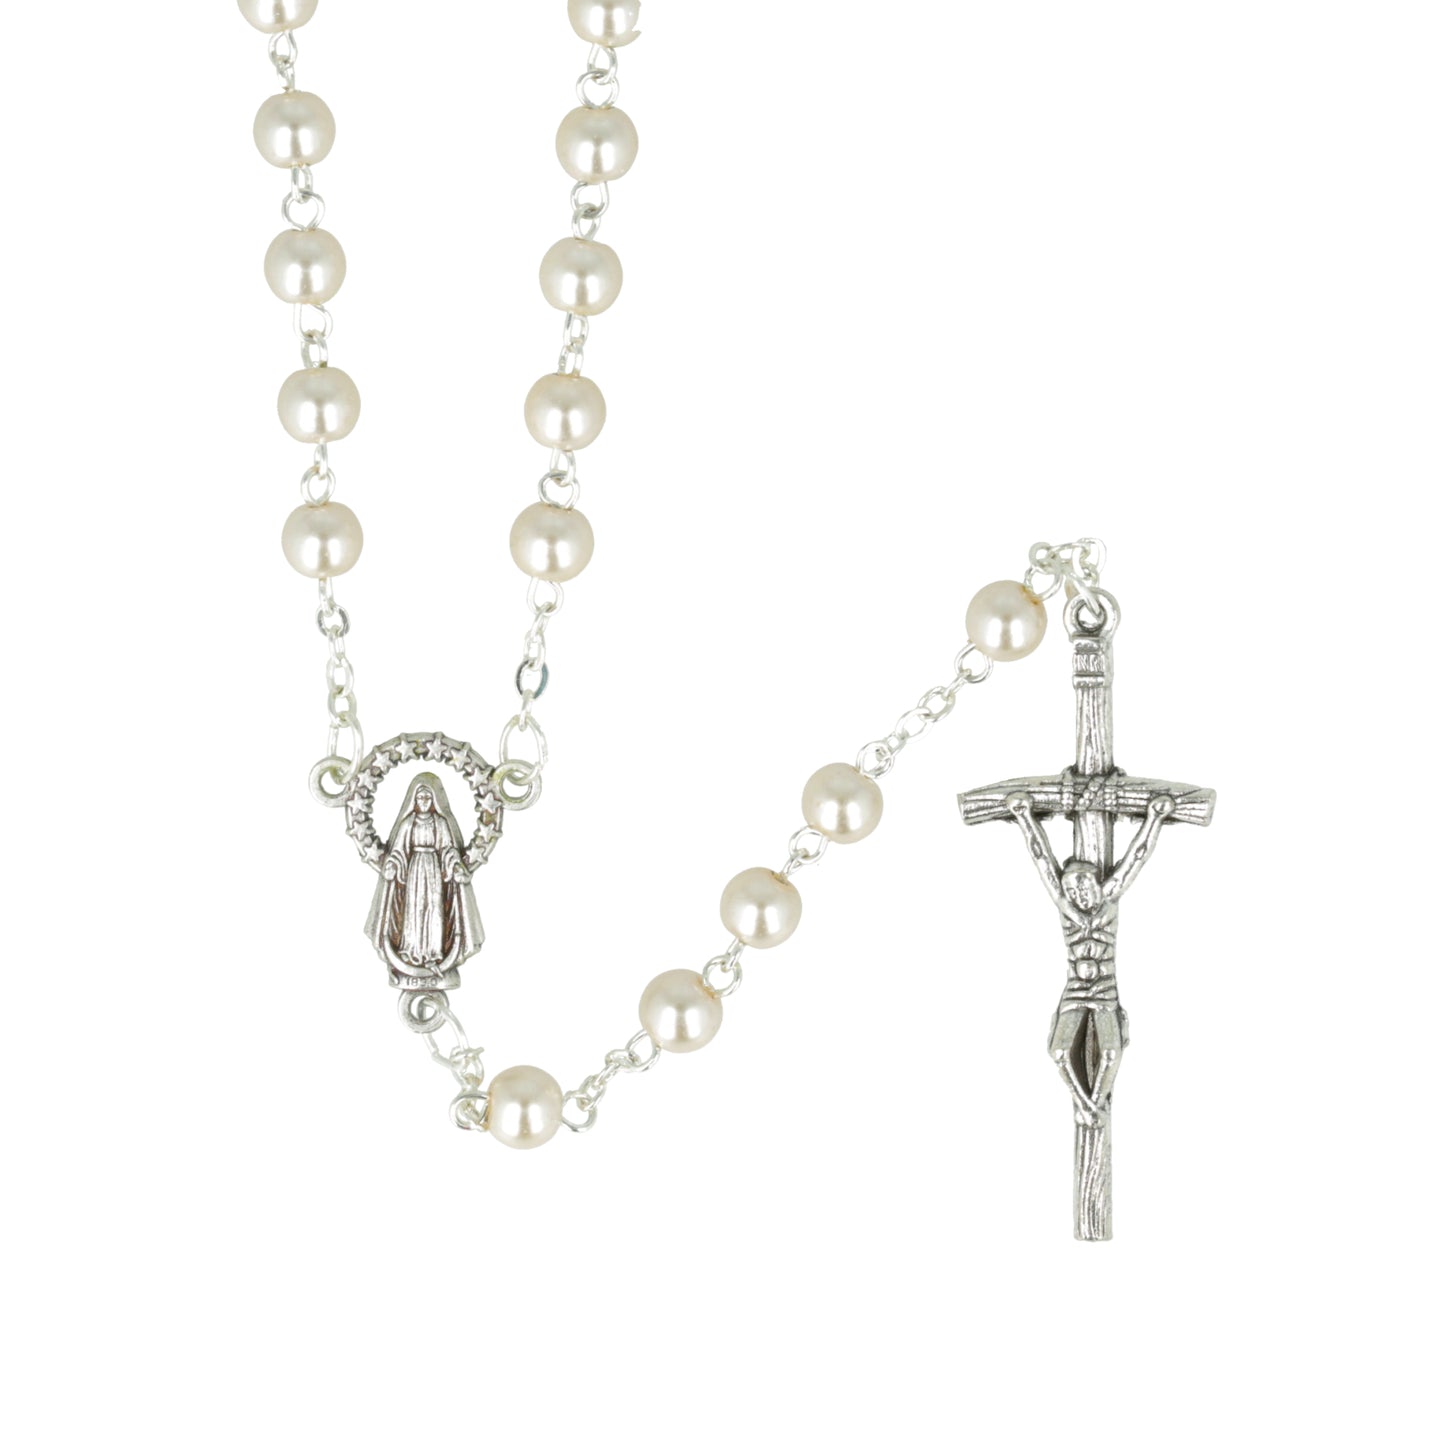 Rosary Simil Pearl Italian Miraculous Virgin Center. Souvenirs from Italy